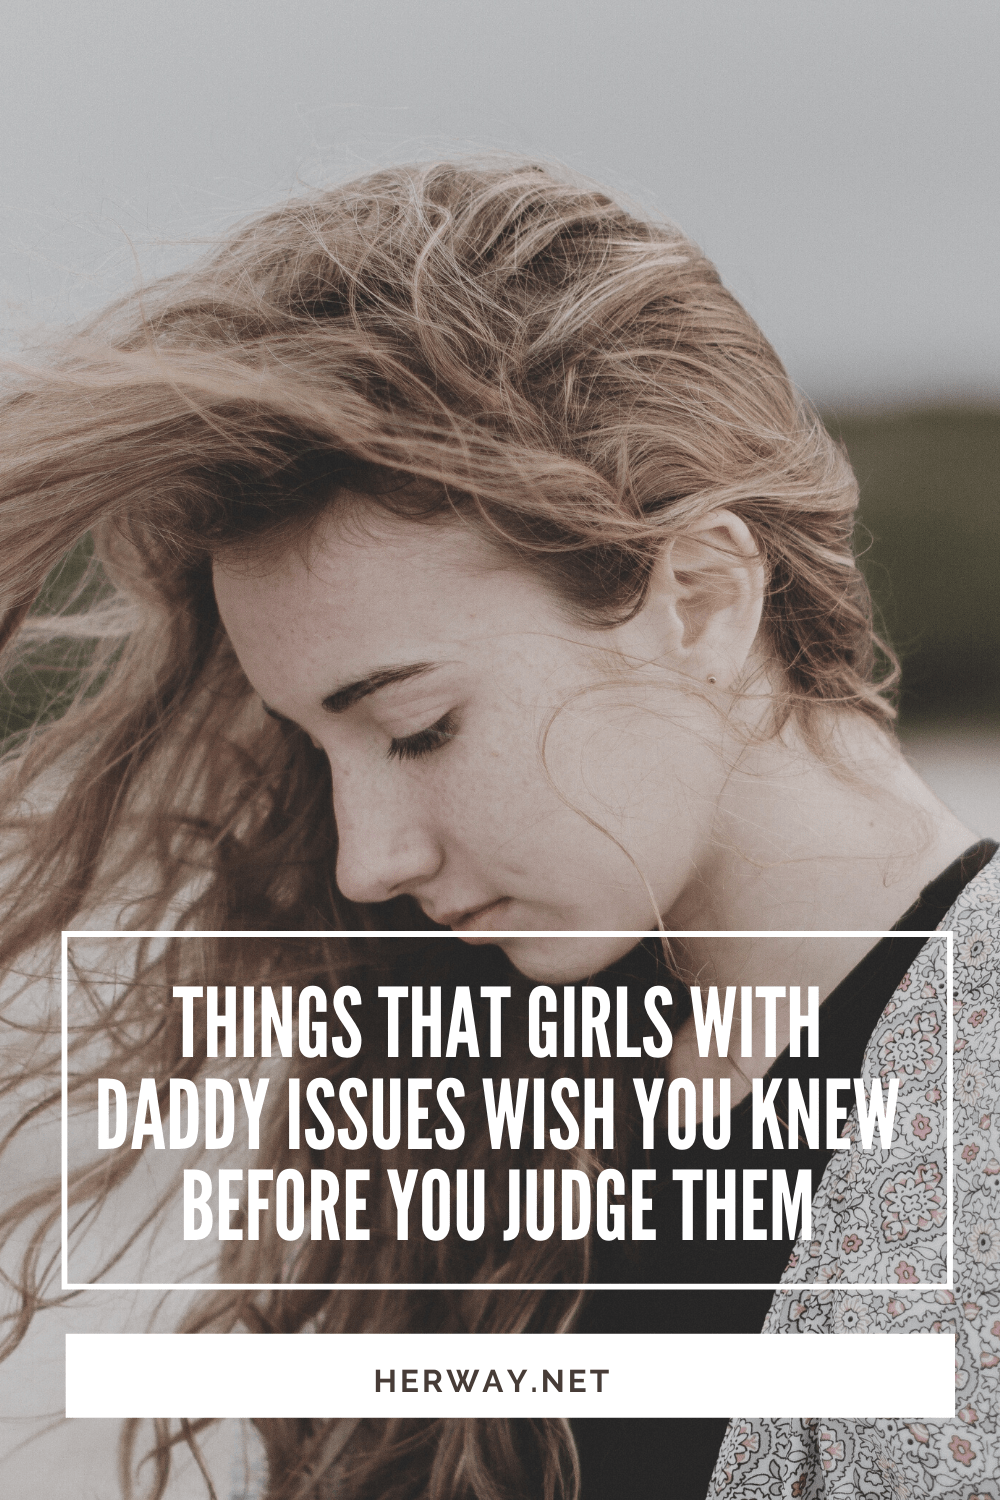 Things That Girls With Daddy Issues Wish You Knew Before You Judge Them